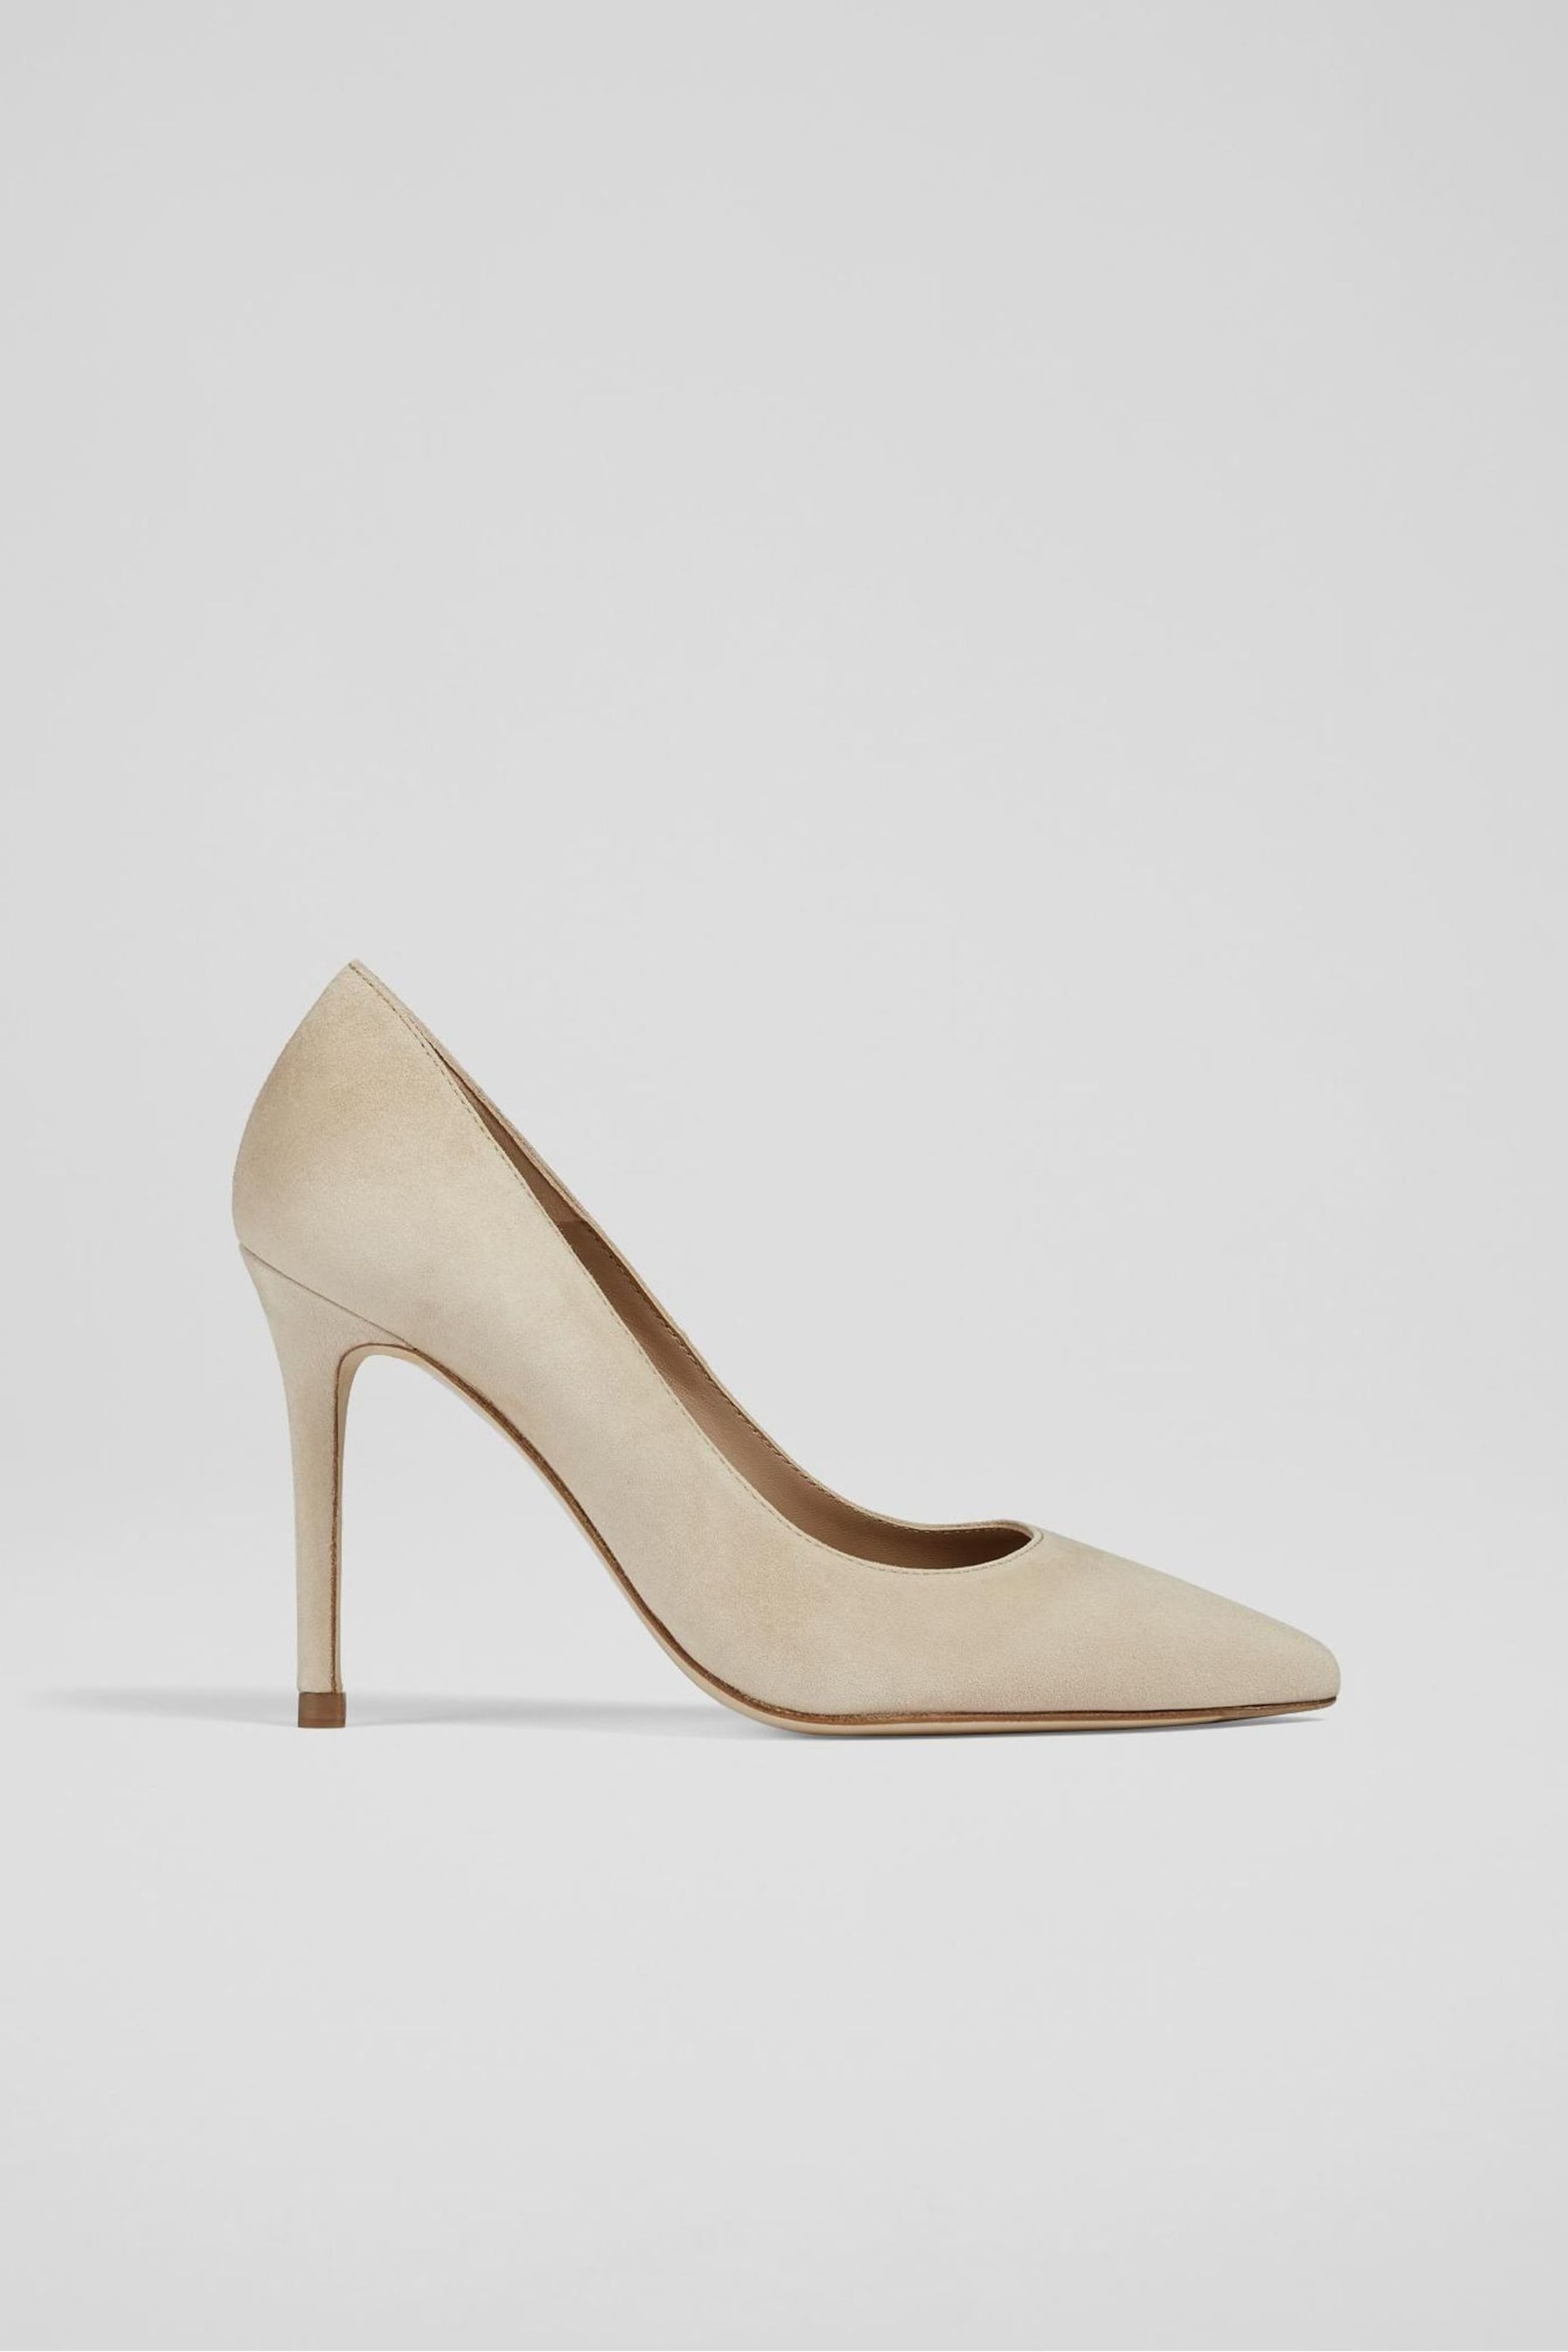 LK Bennett Floret Suede Pointed Toe Courts - Image 1 of 4